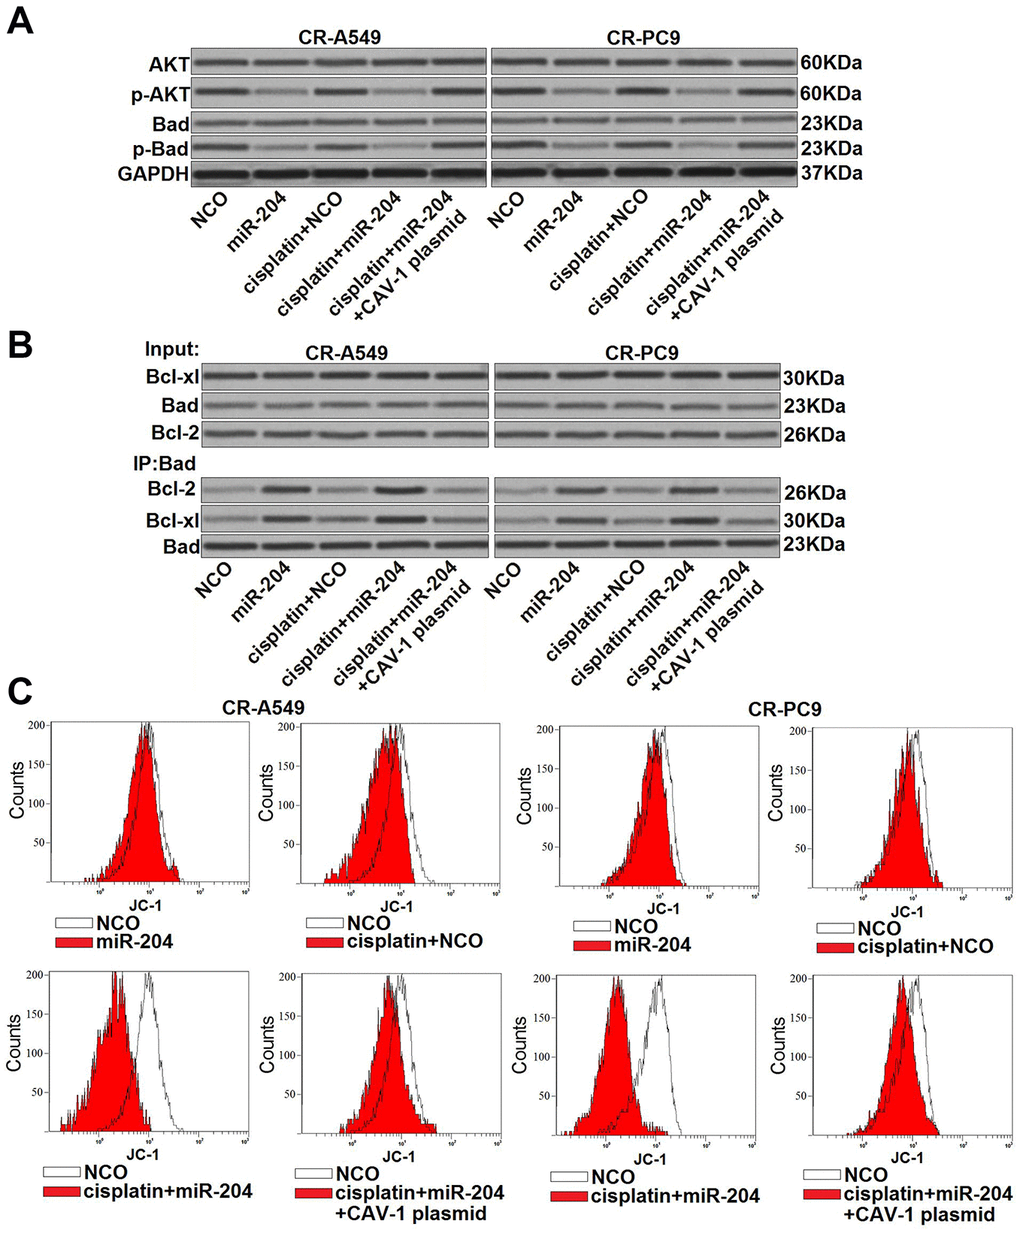 miR-204/CAV-1 axis regulates the AKT/Bad pathway in cisplatin-resistant NSCLC cells. (A) Effect of miR-204 (50 pmol/ml), cisplatin (8 μM), and the CVA-1 plasmid (2 μg/ml) on the phosphorylation of AKT and Bad in CR-A549 and CR-PC9 cells. (B) A co-immunoprecipitation assay was performed to evaluate interactions with Bad and Bcl-xl/Bcl-2 after treatment with miR-204 (50 pmol/ml), cisplatin (8 μM), and the CVA-1 plasmid (2 μg/ml). (C) Effect of miR-204 (50 pmol/ml), cisplatin (8 μM), and the CVA-1 plasmid (2 μg/ml) on the mitochondrial membrane potential (ΔΨm) of CR-A549 and CR-PC9 cells.